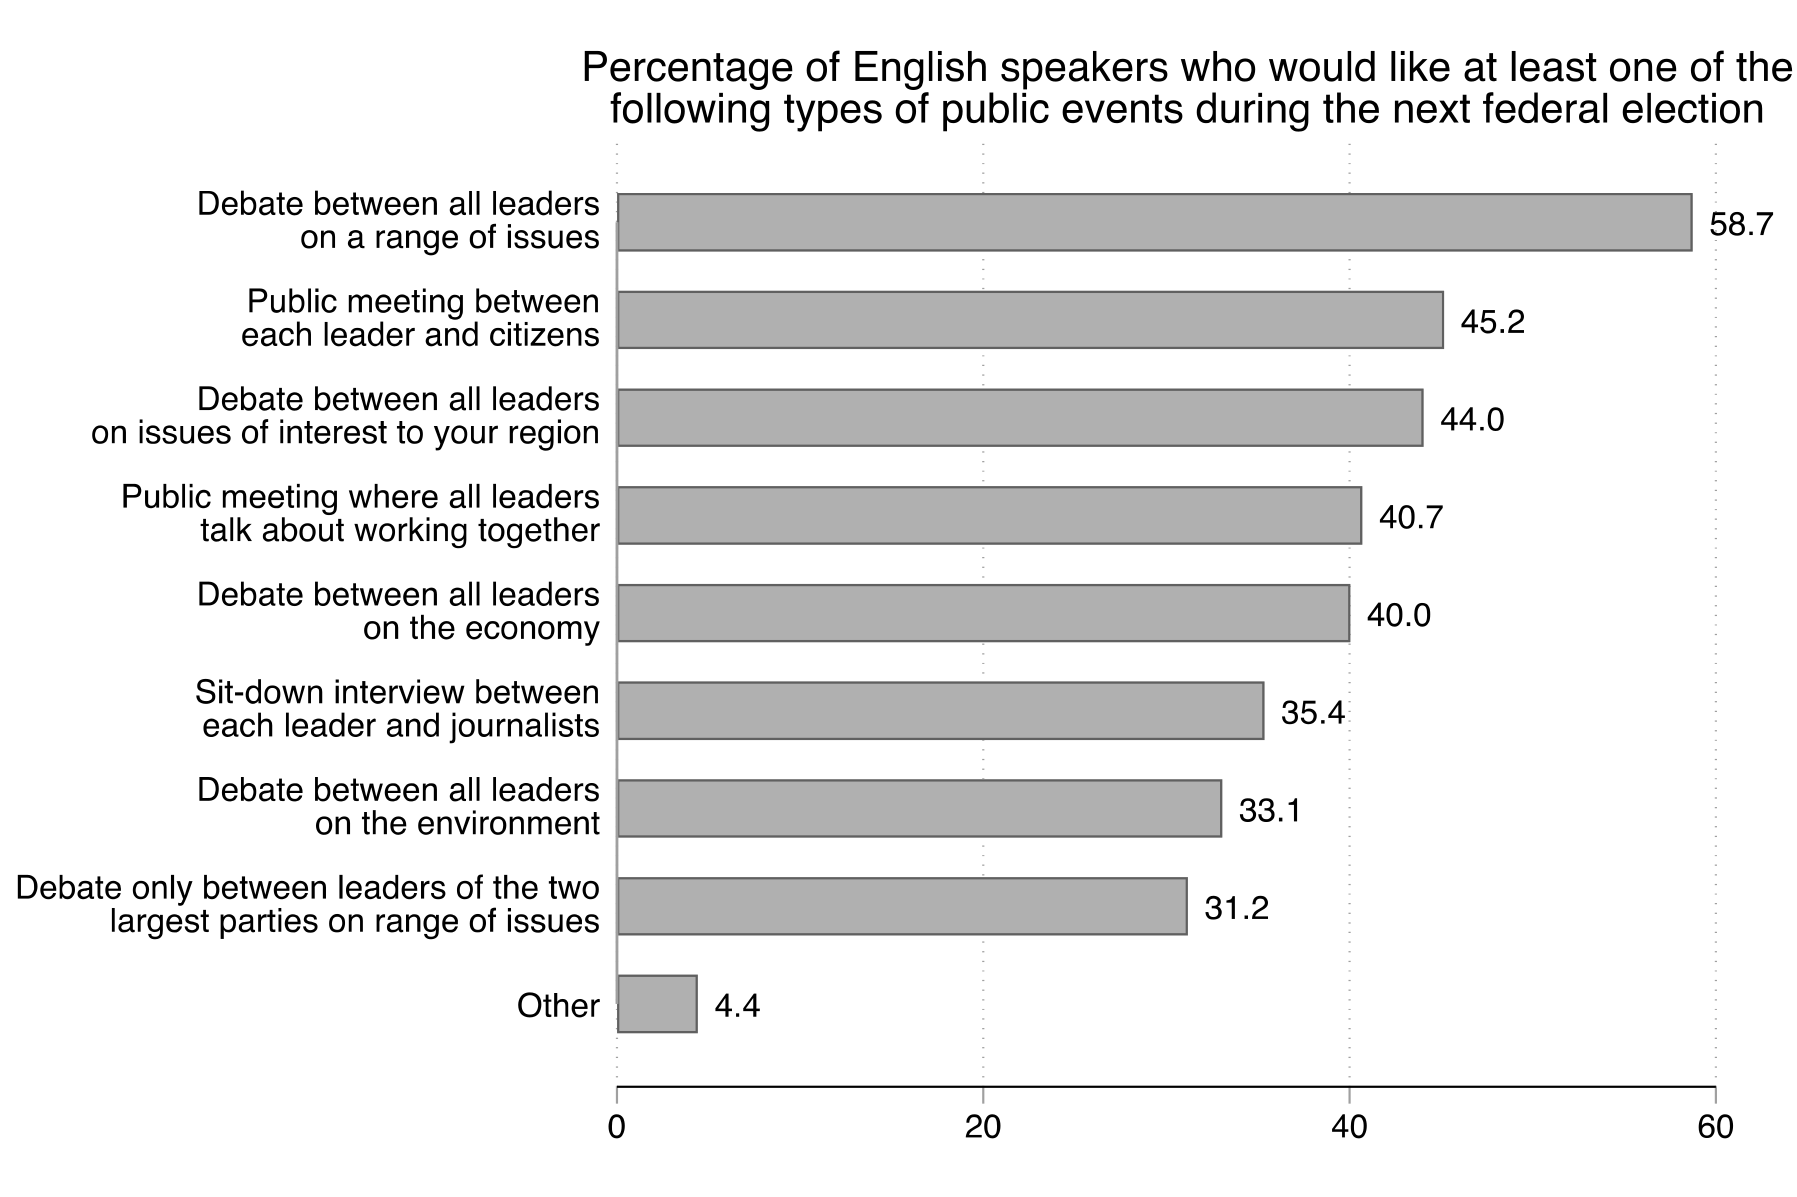 Figure 43. This figure shows how English speaking participants allocated their selections across different types of English public events. For example, 59% of participants selected at least one debate between all leaders on a range of issues.  This is the most commonly selected type.  By contrast, 31% of participants selected at least one debate between only the leaders of the two largest parties on a range of issues.  This is the least commonly selected type.